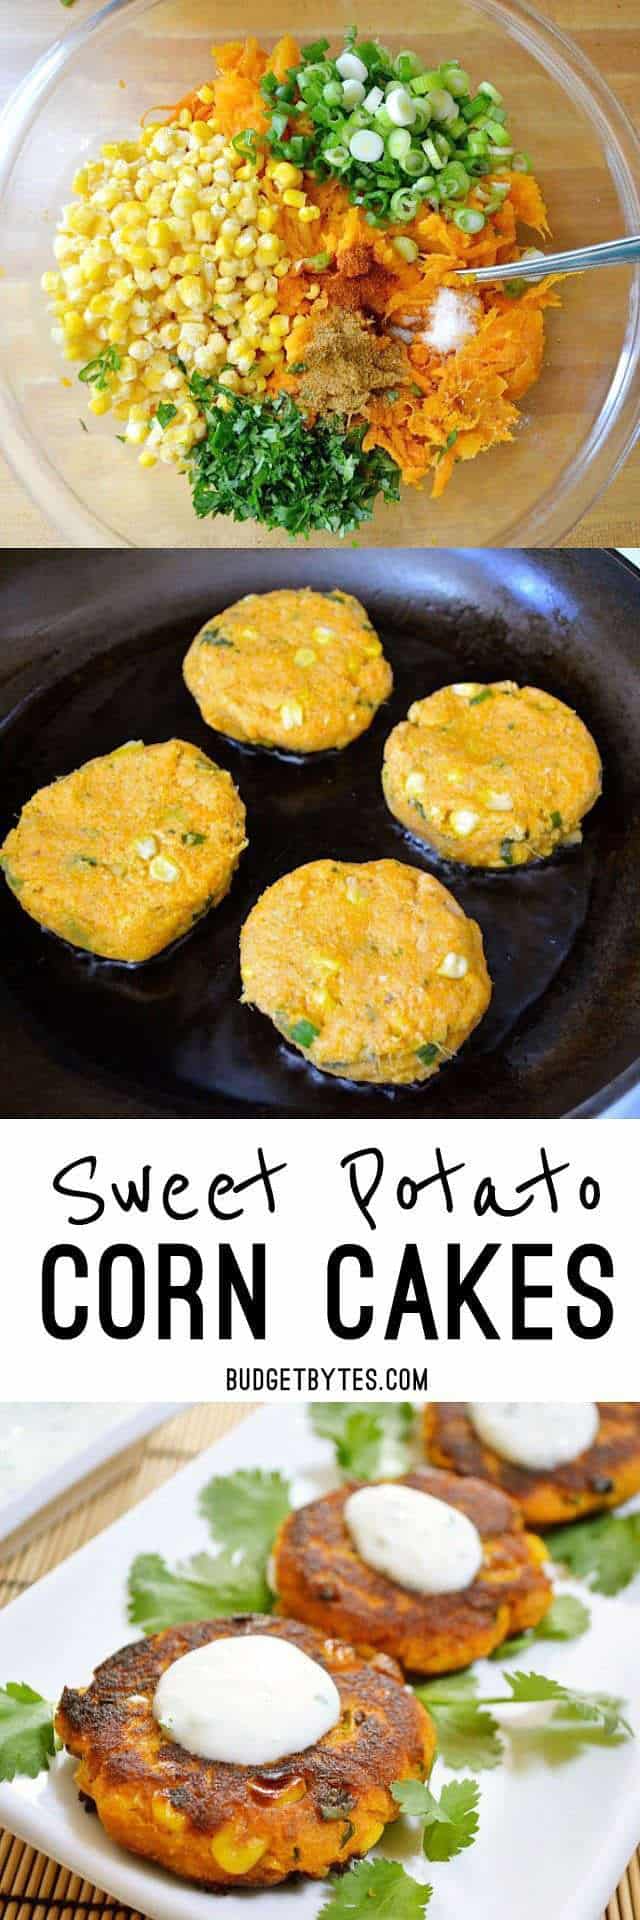 Cumin, cilantro, and cayenne pepper add big flavor to these savory Sweet Potato Corn Cakes. Dip them in the creamy garlic sauce for even more zing! BudgetBytes.com